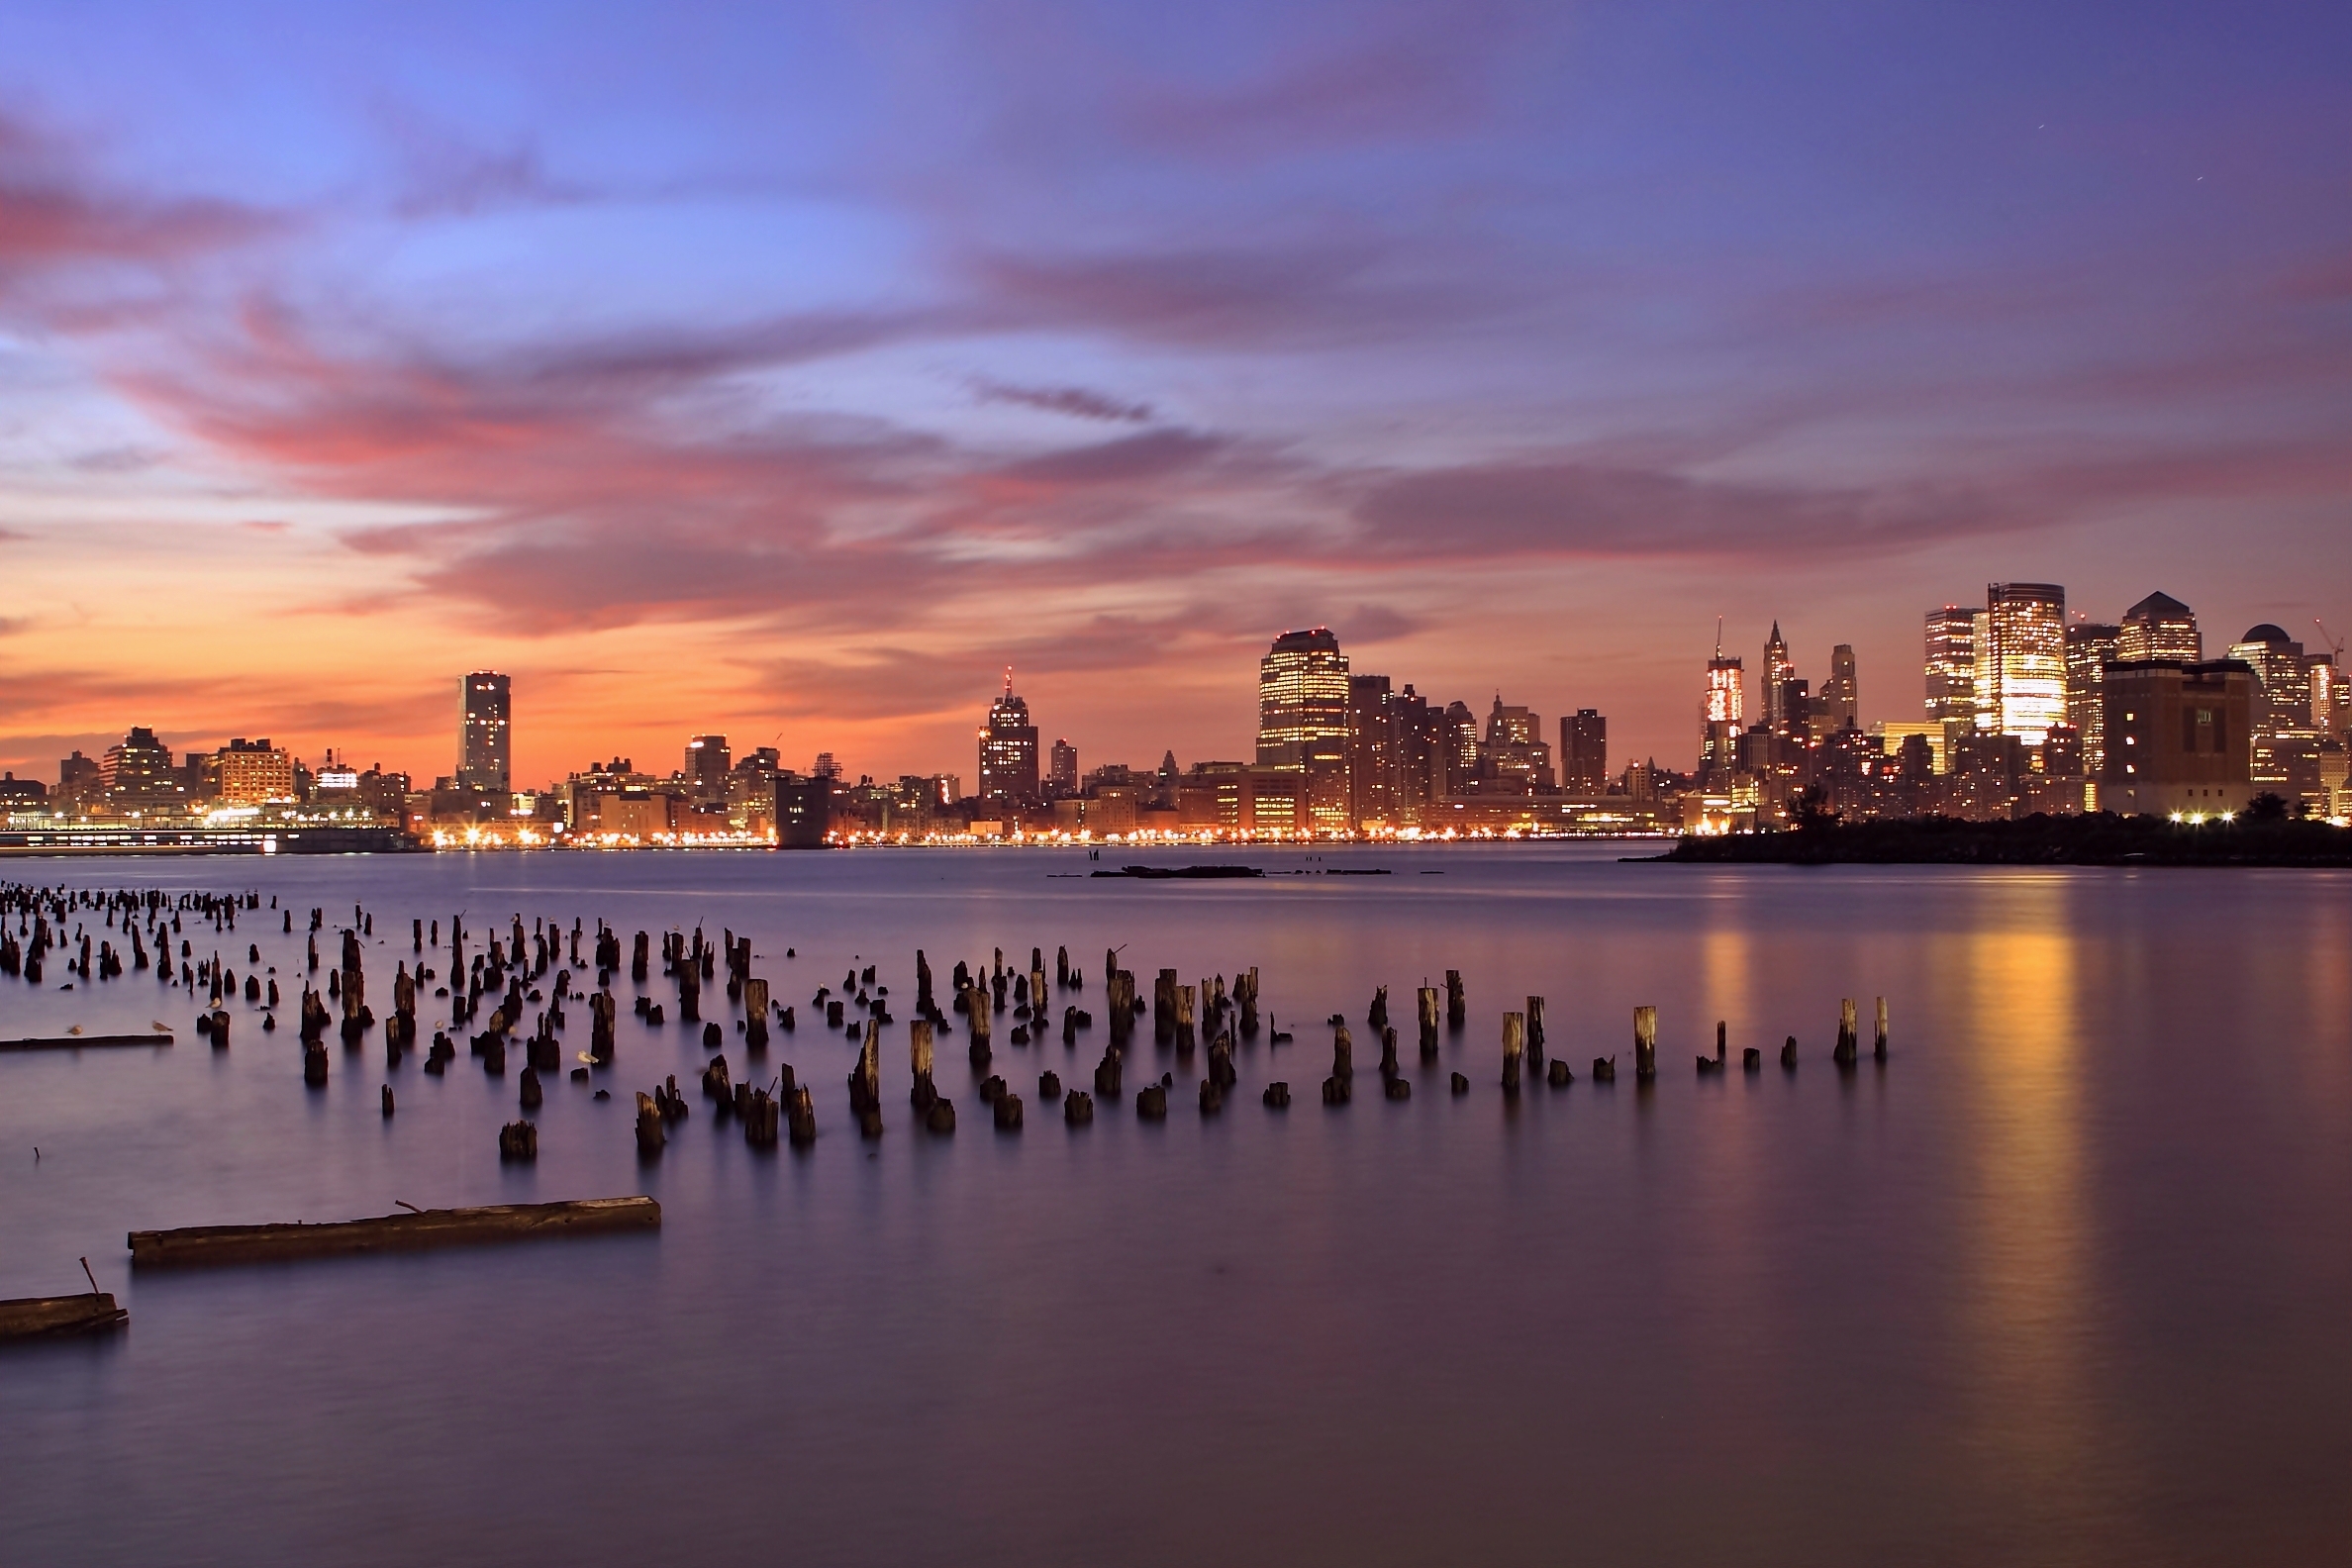 cities, rivers, sunset, sky, lilac, clouds, usa, orange, lights, wooden, skyscrapers, backlight, illumination, evening, united states, pillars, jersey city, state of new jersey, new jersey state, hudson, columns Aesthetic wallpaper